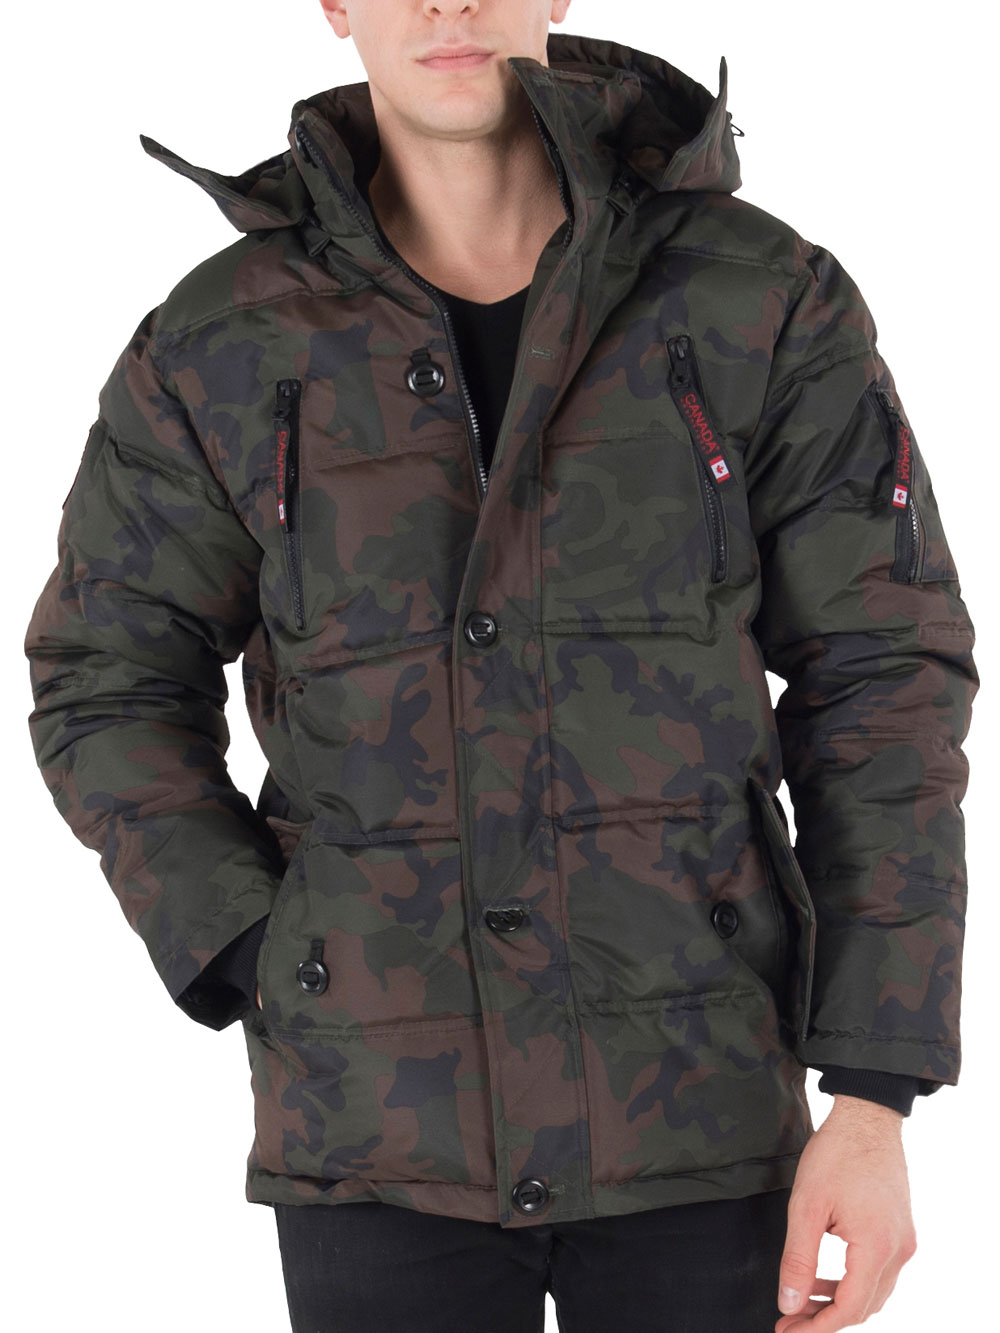 Boys Canada Weather Gear Mens' Big and Tall Insulated Parka